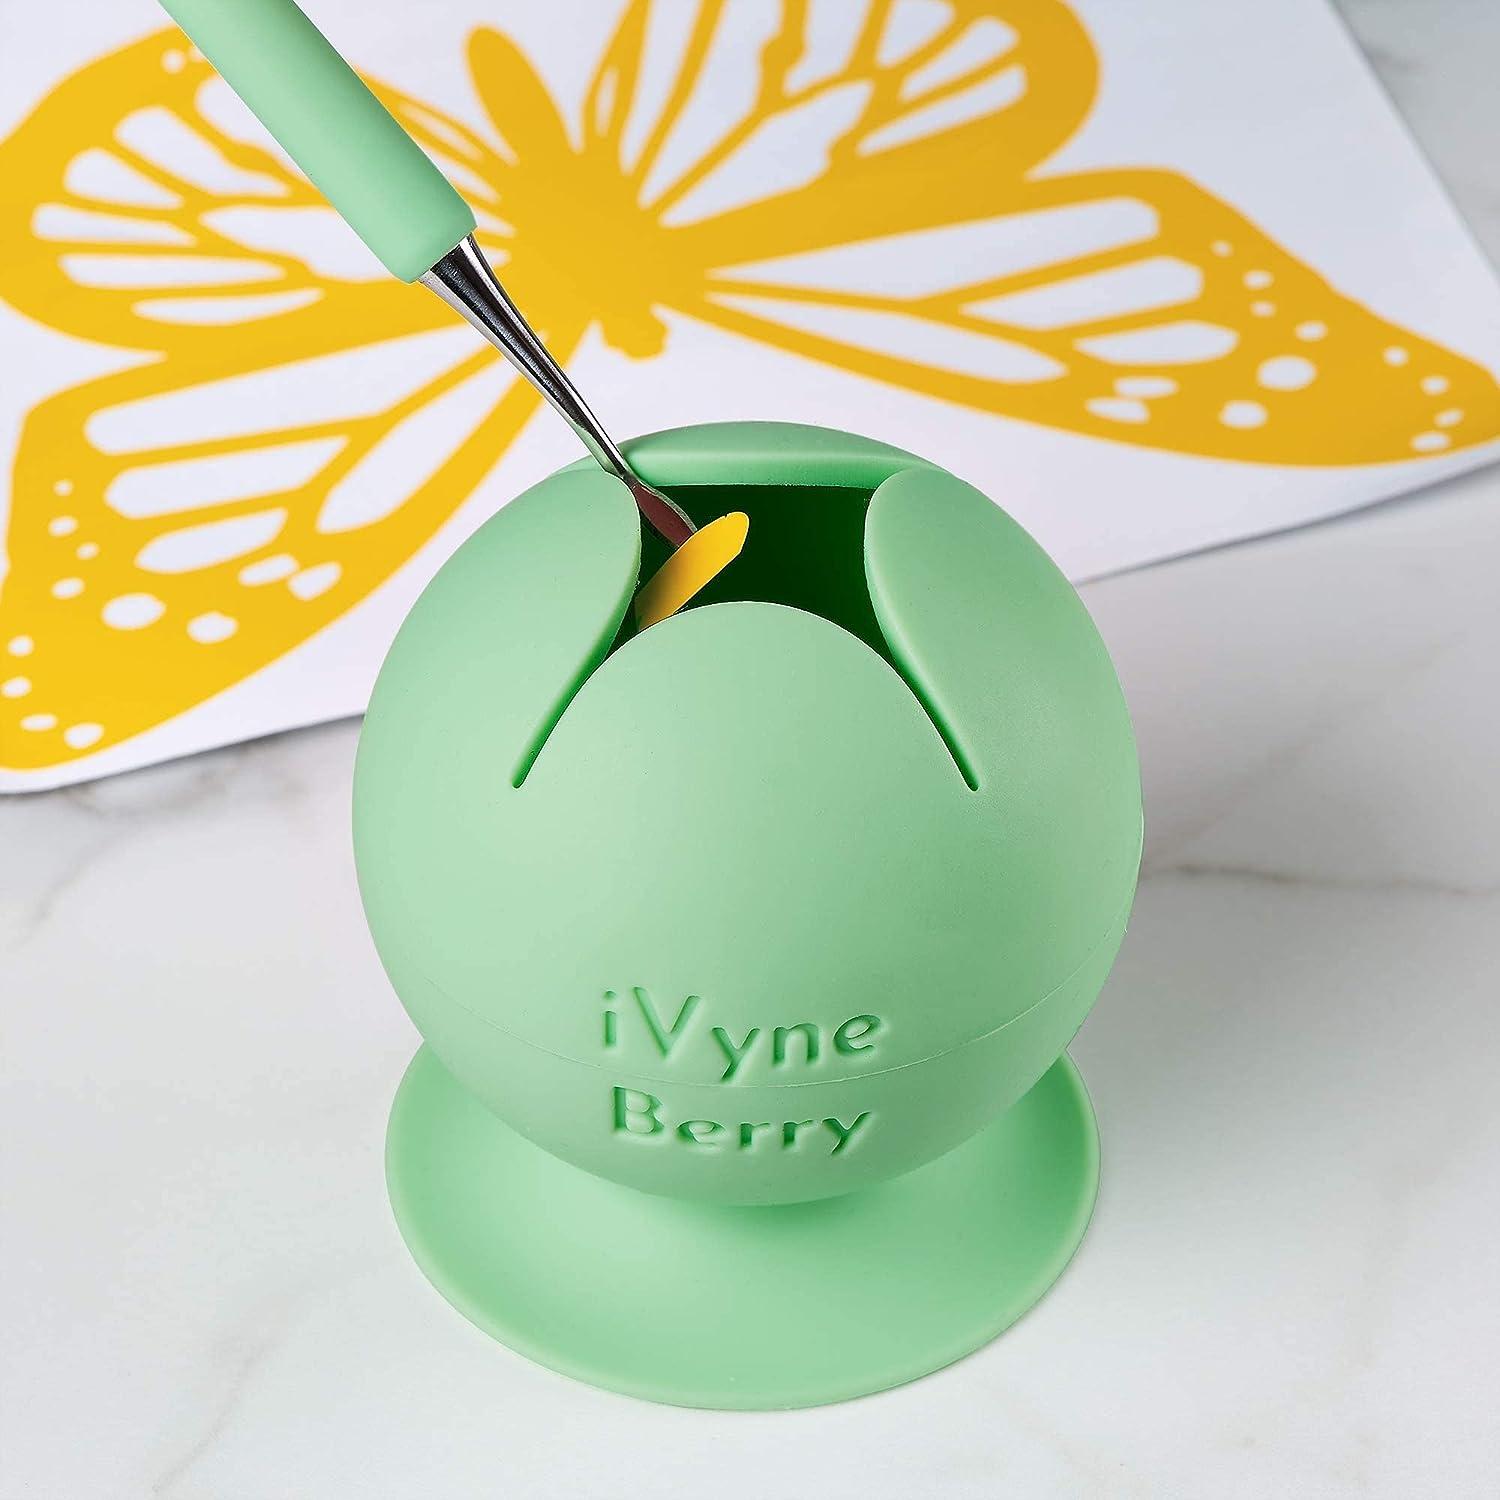  iVyne Berry Suctioned Vinyl Weeding Scrap Collector & Holder  for Weeding Tools for Vinyl - Green : Arts, Crafts & Sewing